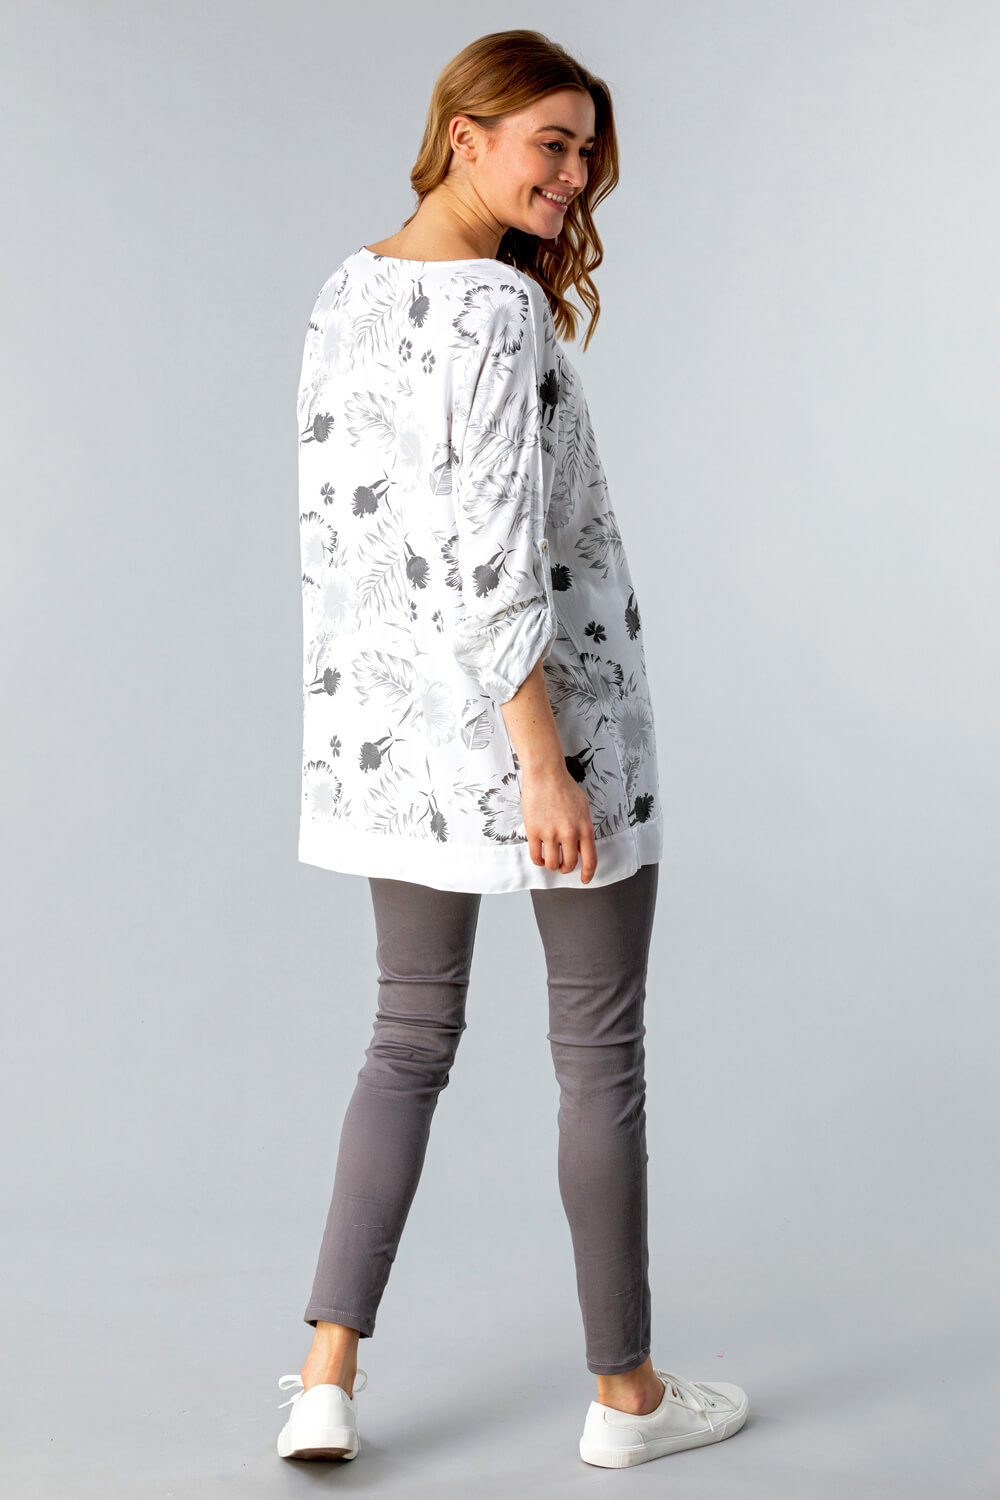 White Floral Print Longline Tunic Top, Image 2 of 4